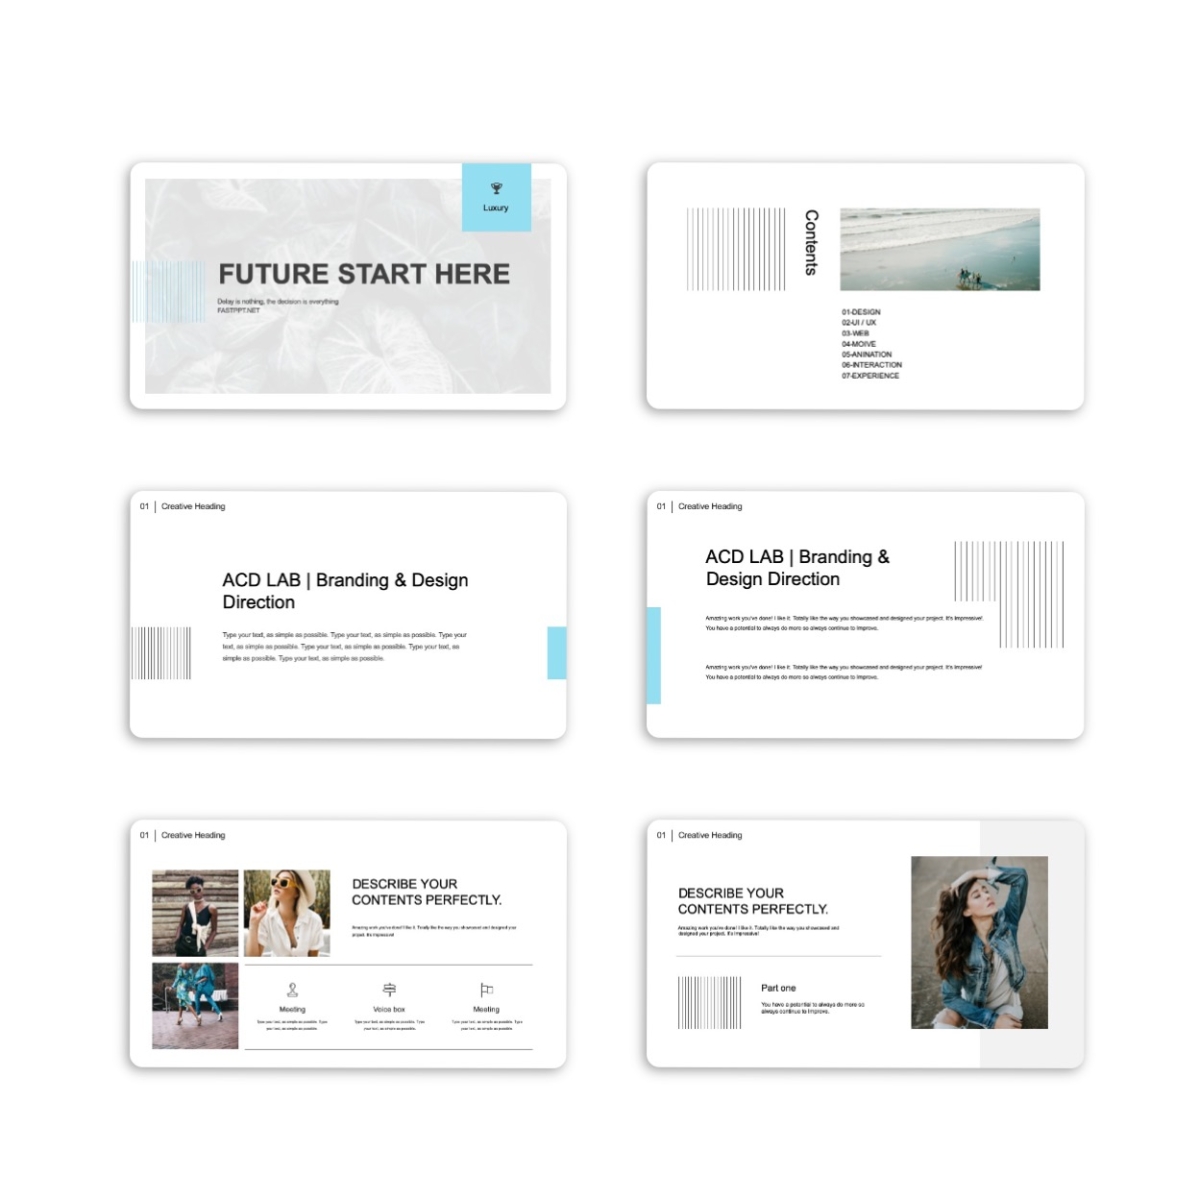 Blue Clean Business Report PowerPoint Template